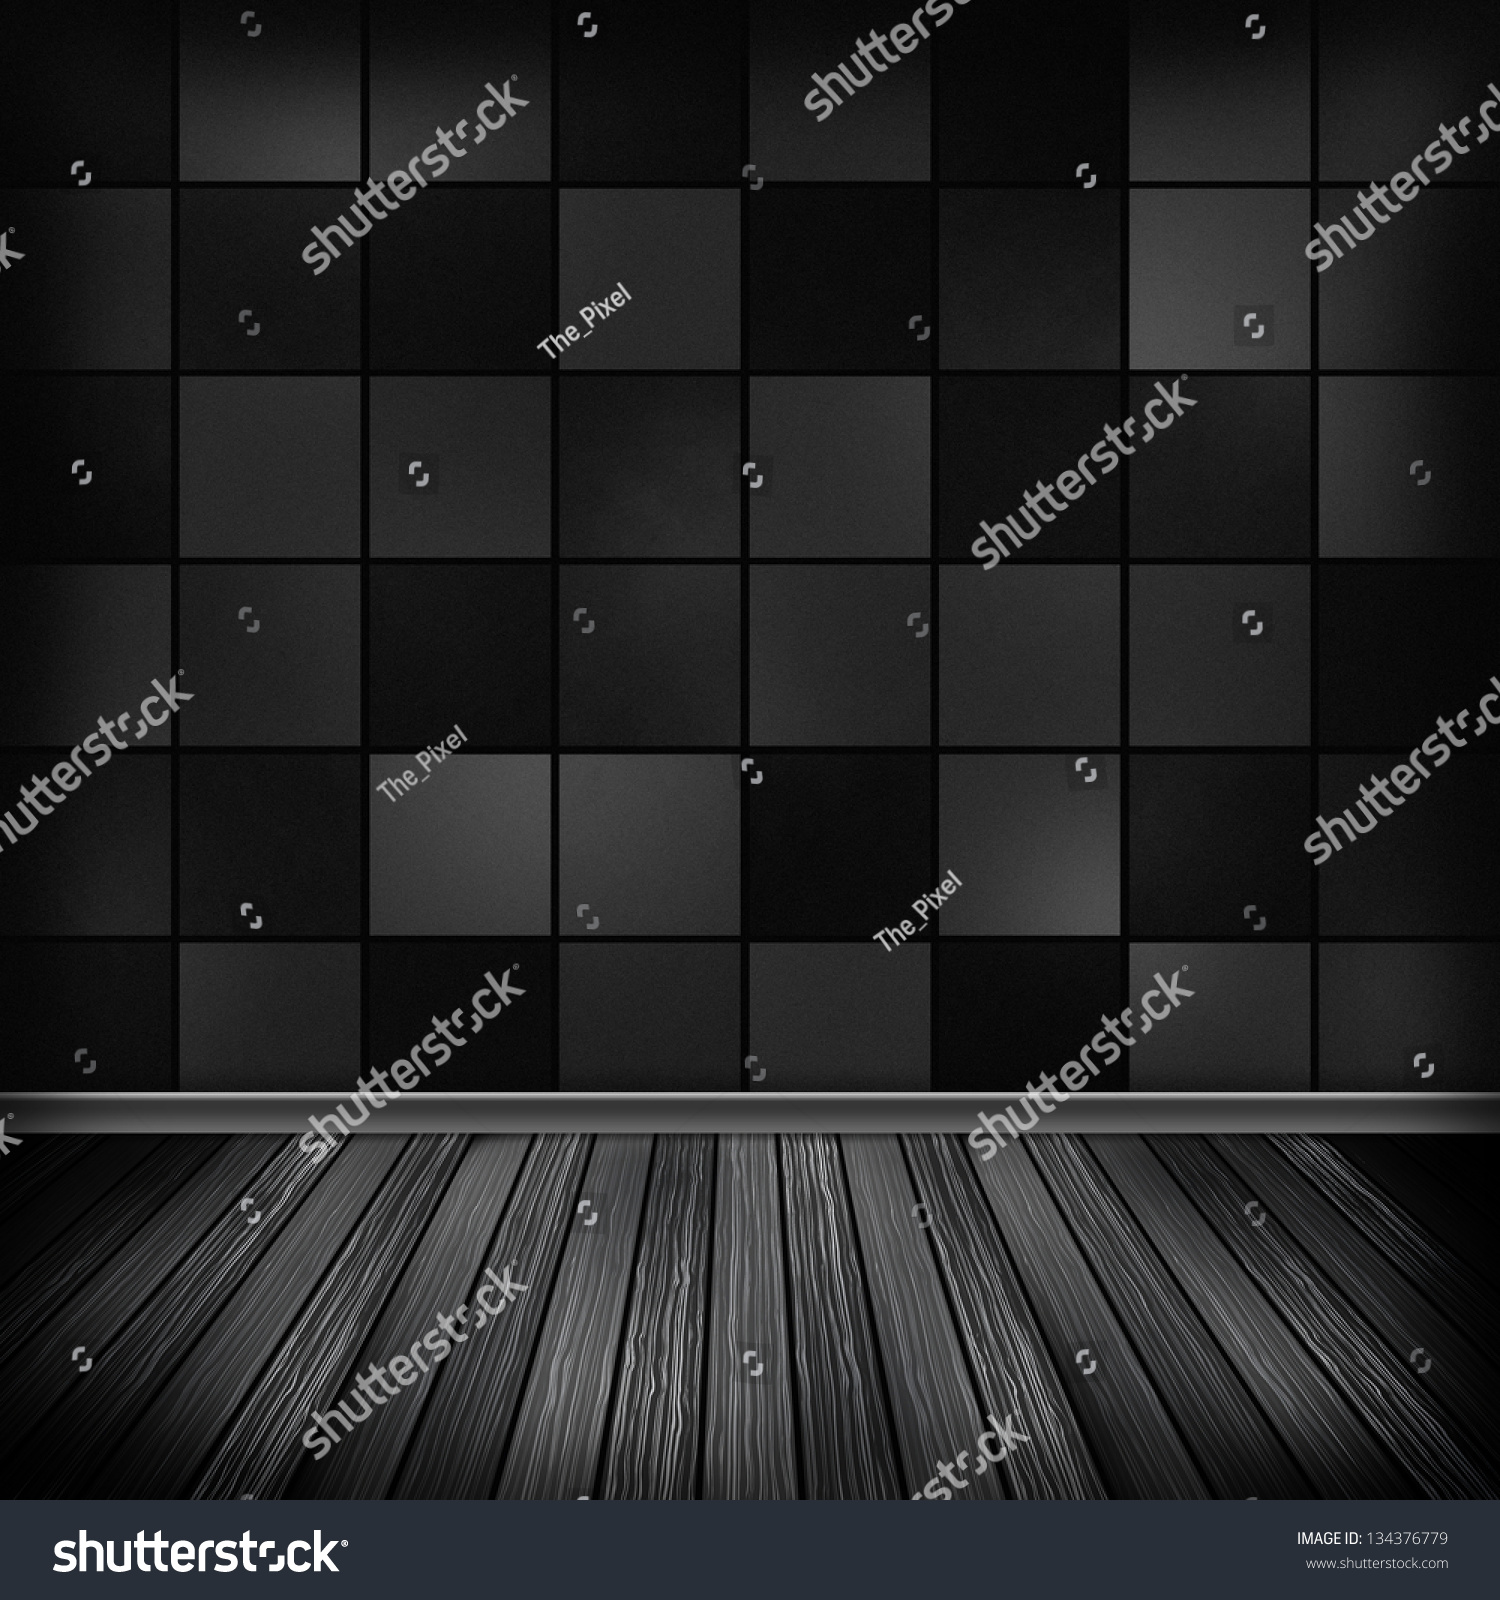 Black Empty Room, Interior With Wallpaper. High Resolution Texture Background. Stock Photo